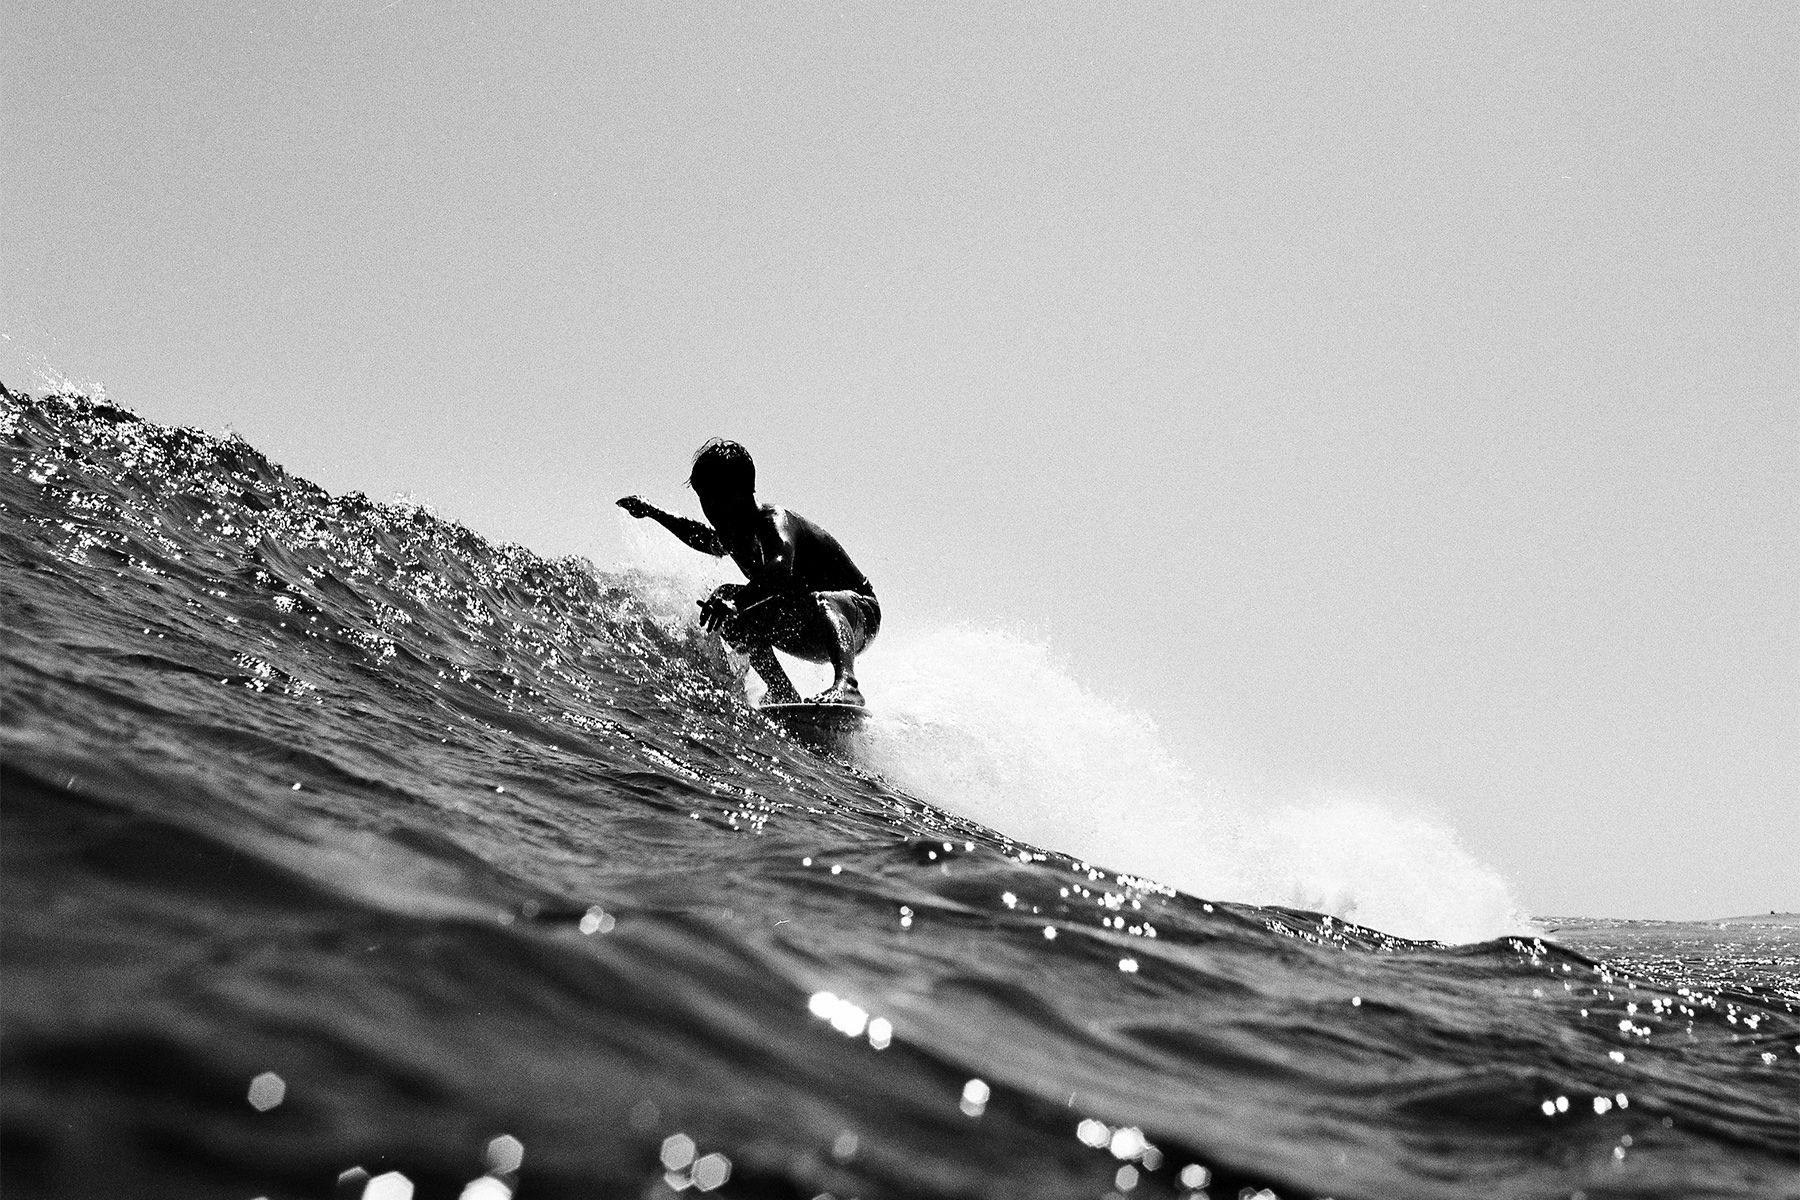 longboarder doing a stretch-five noseride at malibu, shot on black and white film by grant musso